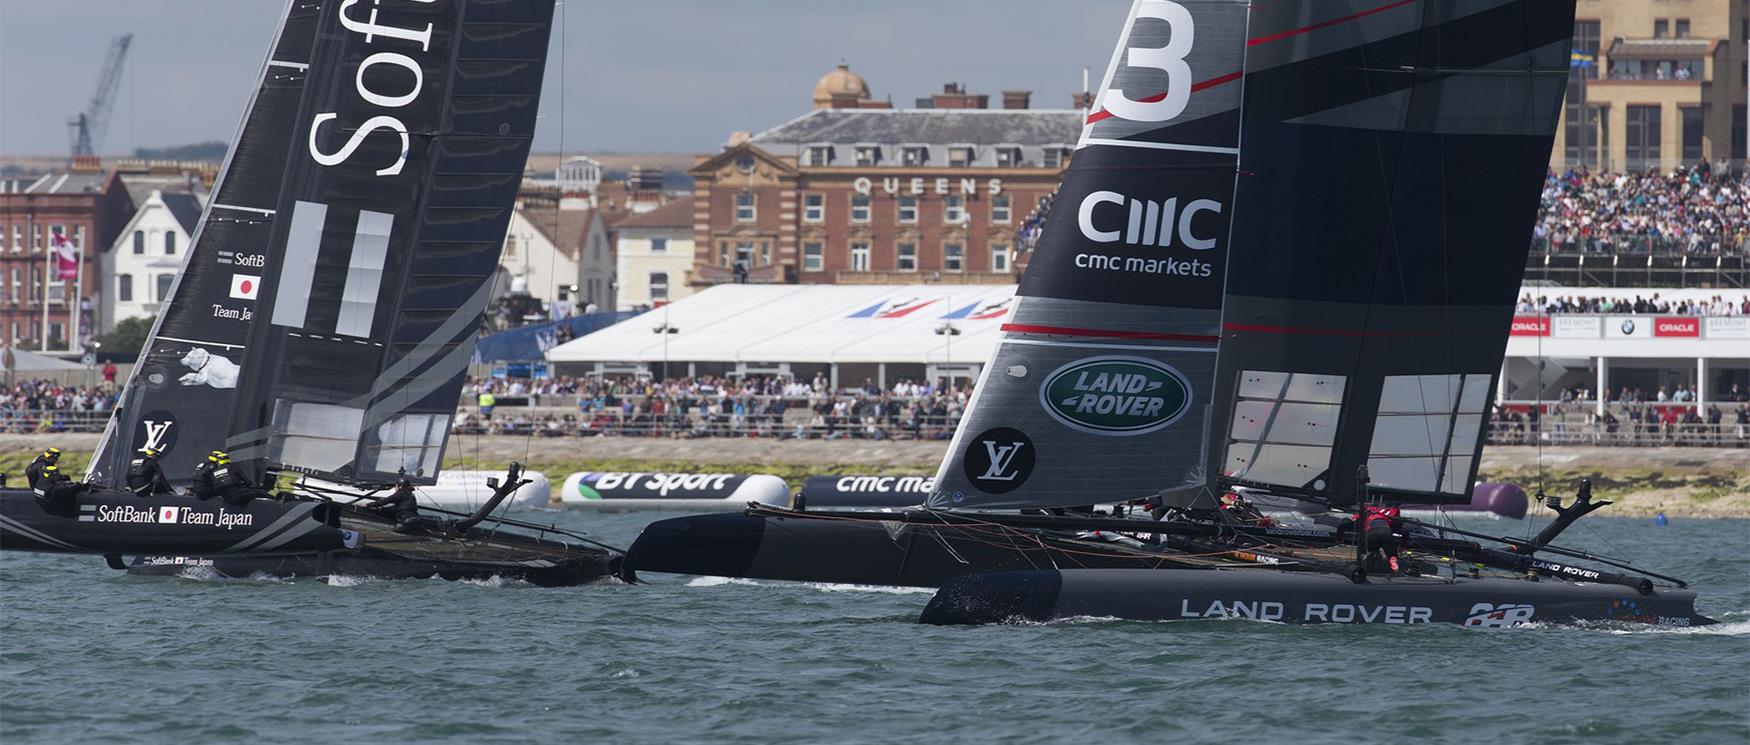 British boat back in the America's Cup World Series